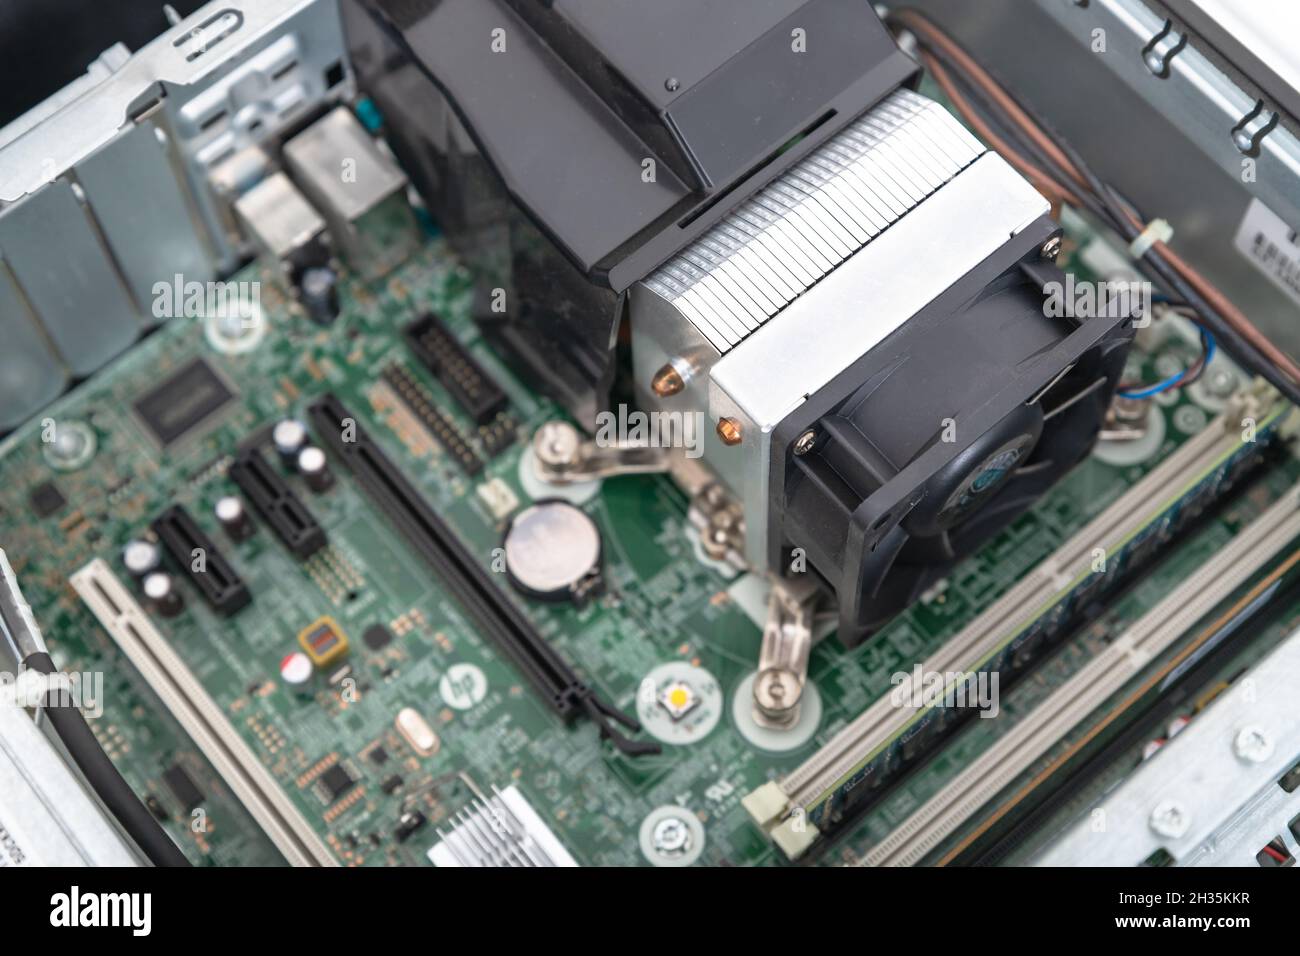 Woodville, Australia - October 15, 2021: Closed-up top view of CPU cooler inside a small factor business desktop Stock Photo